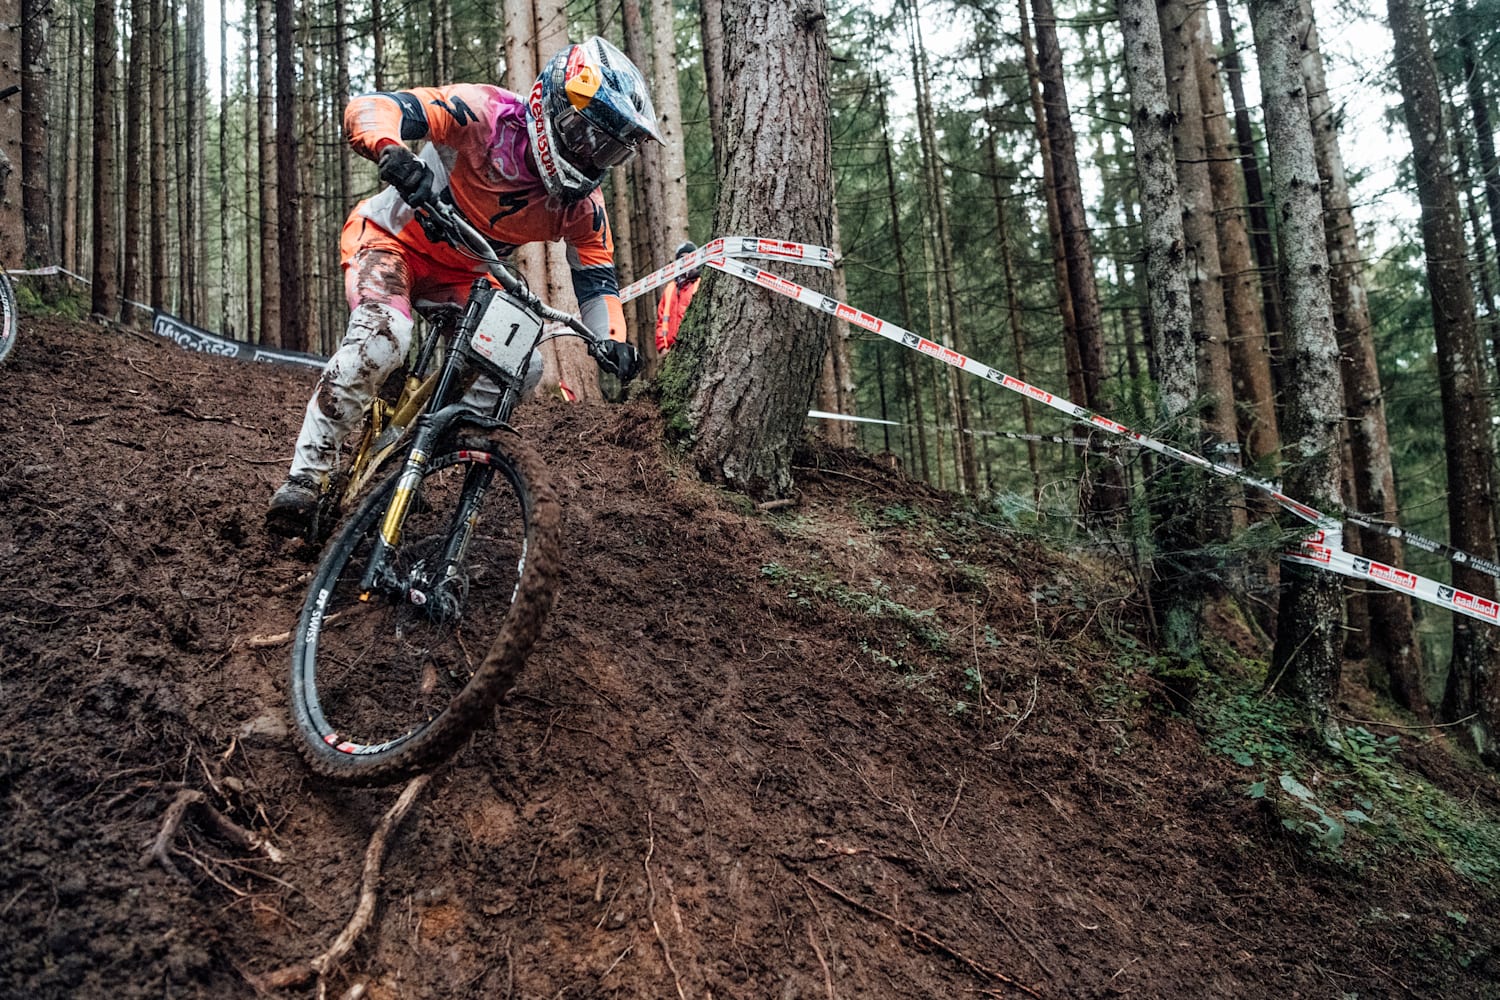 2021 and 2022 UCI MTB World Cup calendar: DH/XCO dates